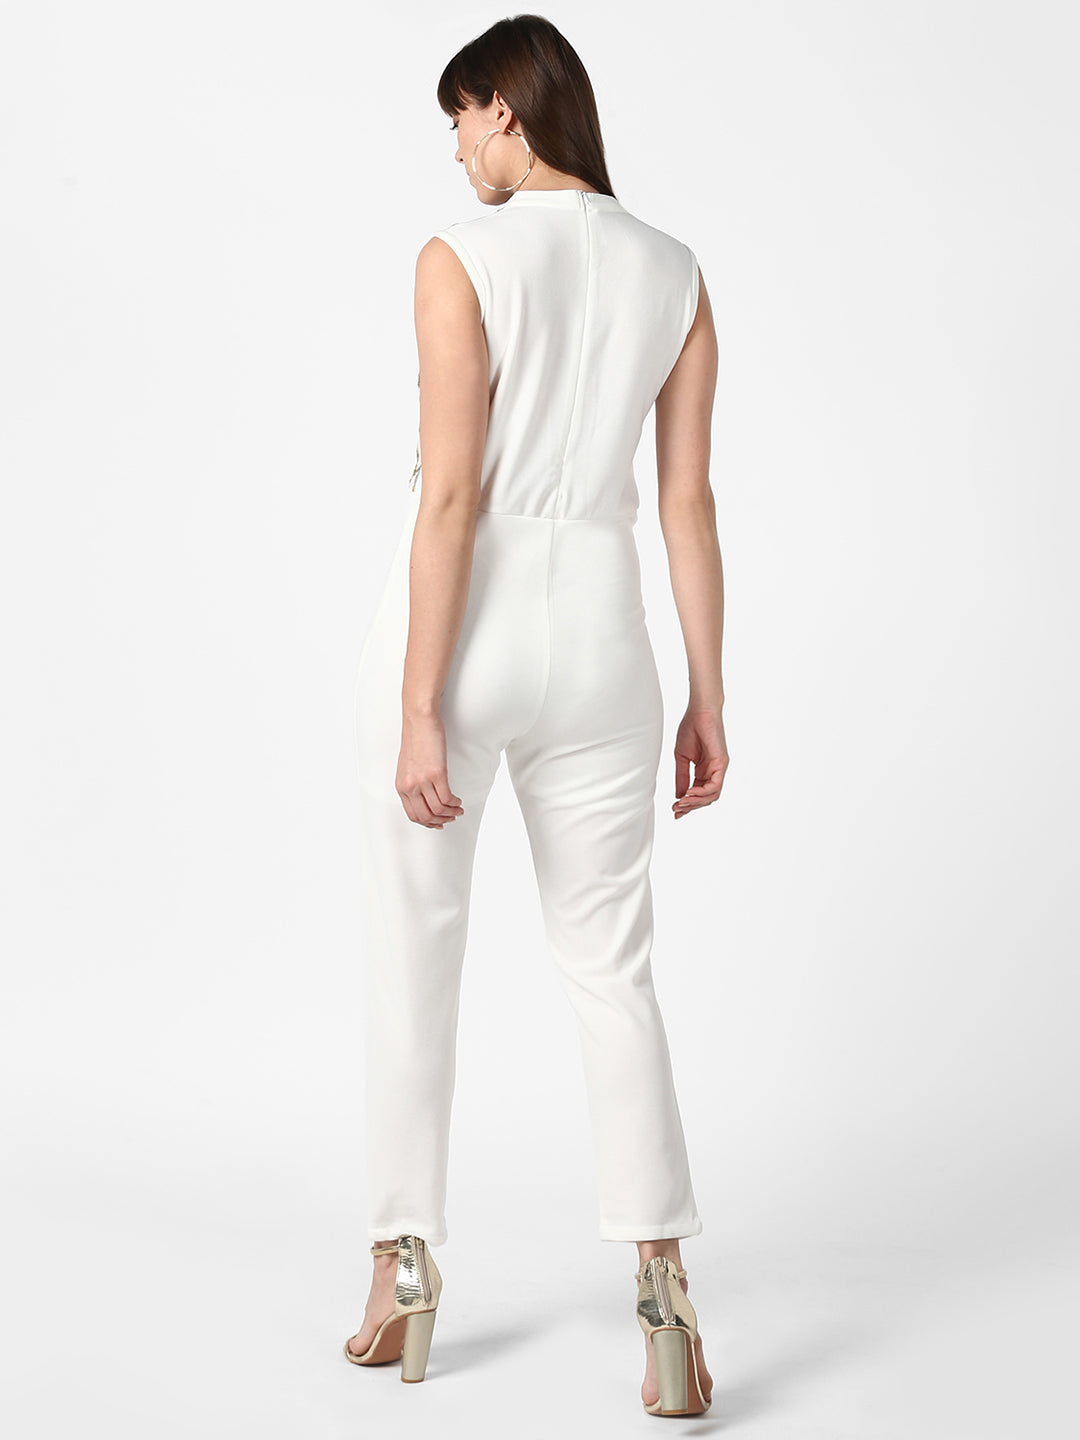 Women's White and Golden-Silver Sequin Jumpsuit